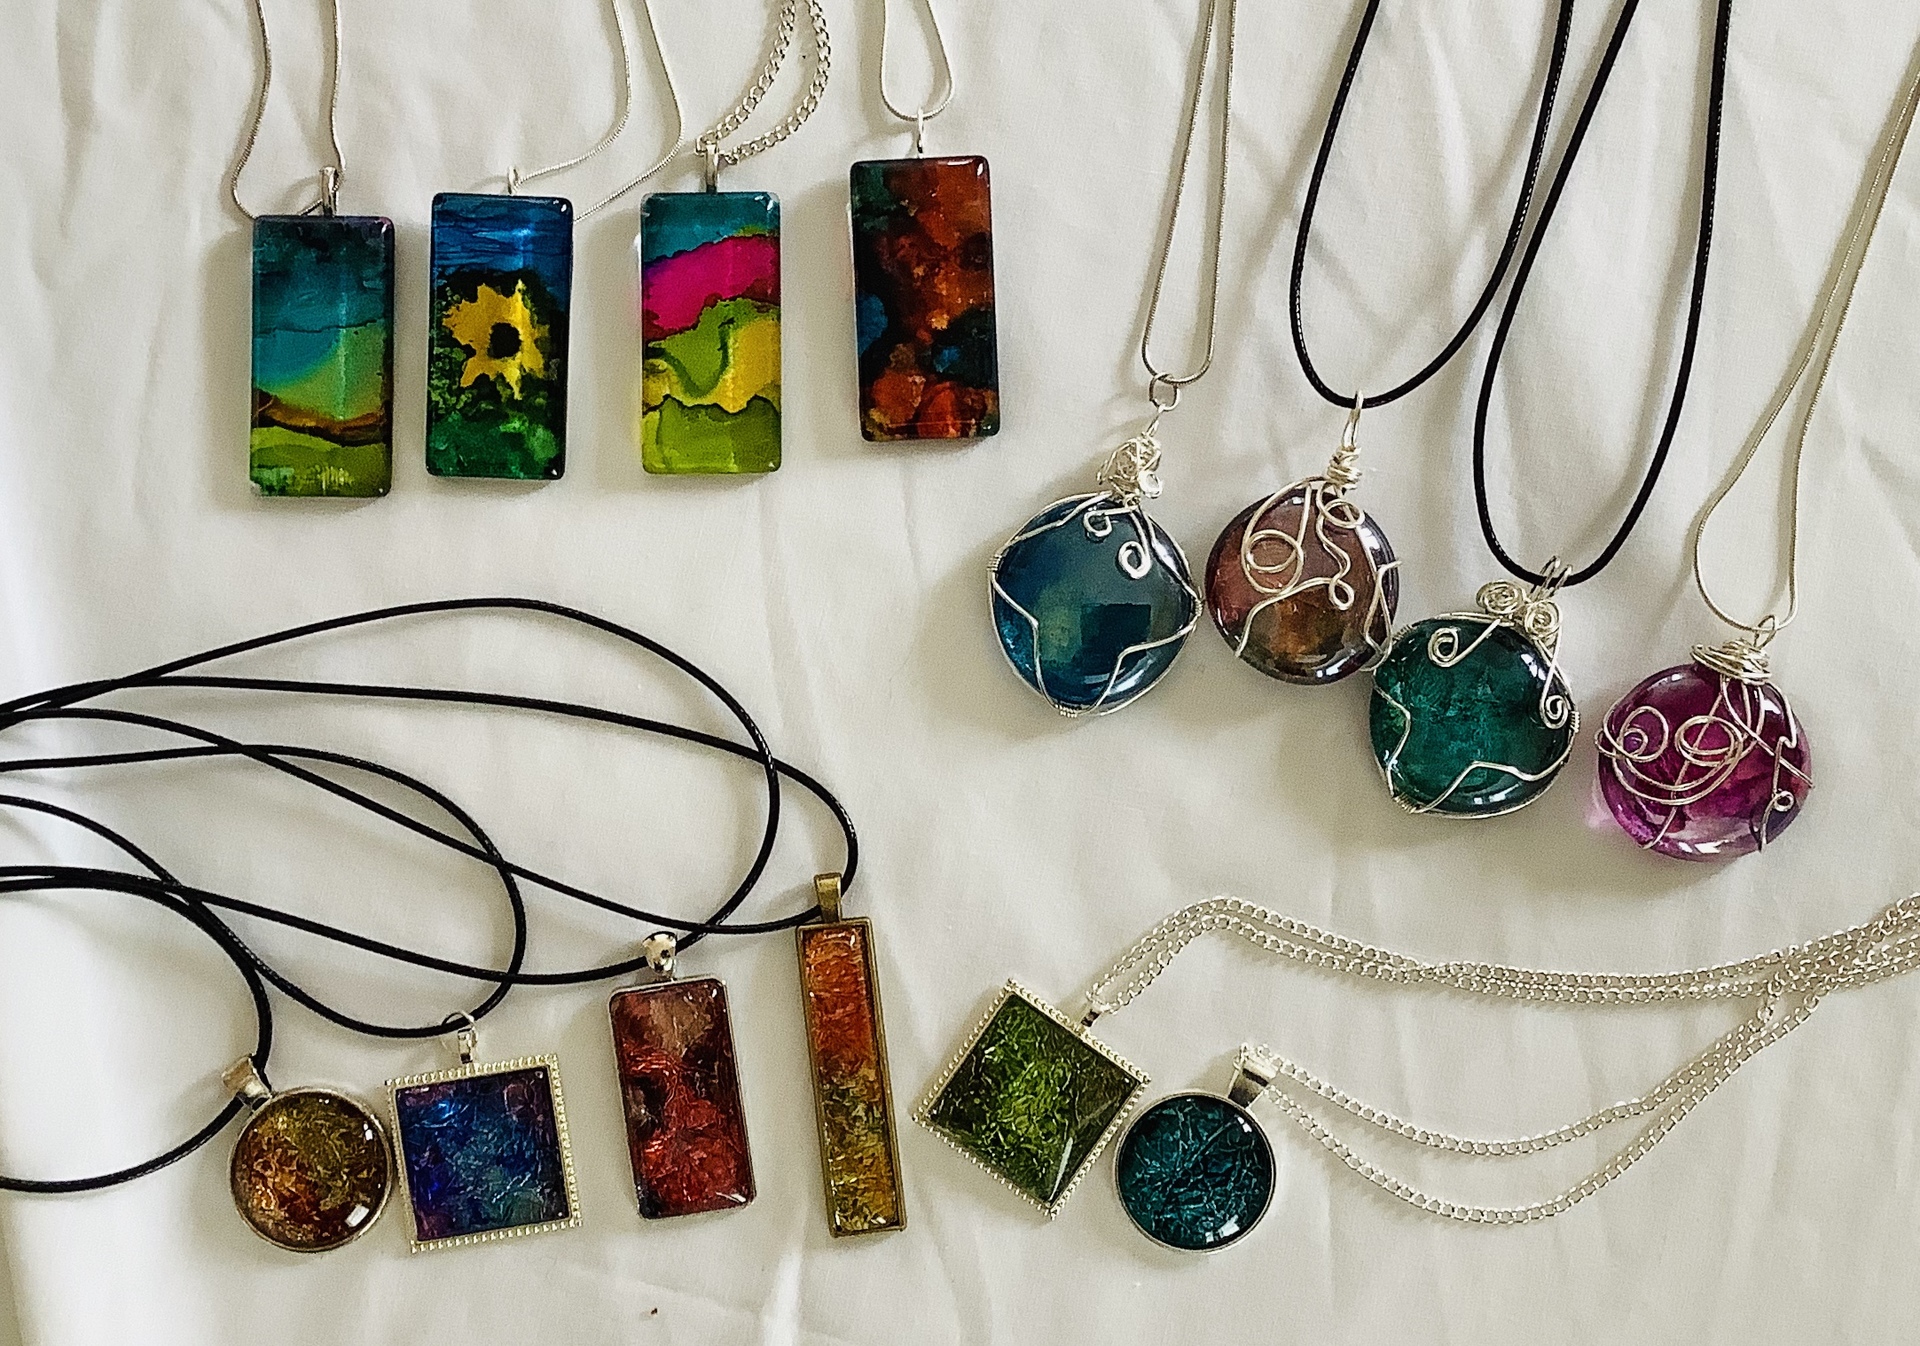 Alcohol Ink Pendants are individually hand painted in several styles and settings. Some are set in a tray while other are hand wired. Price $25.00 - $45.00